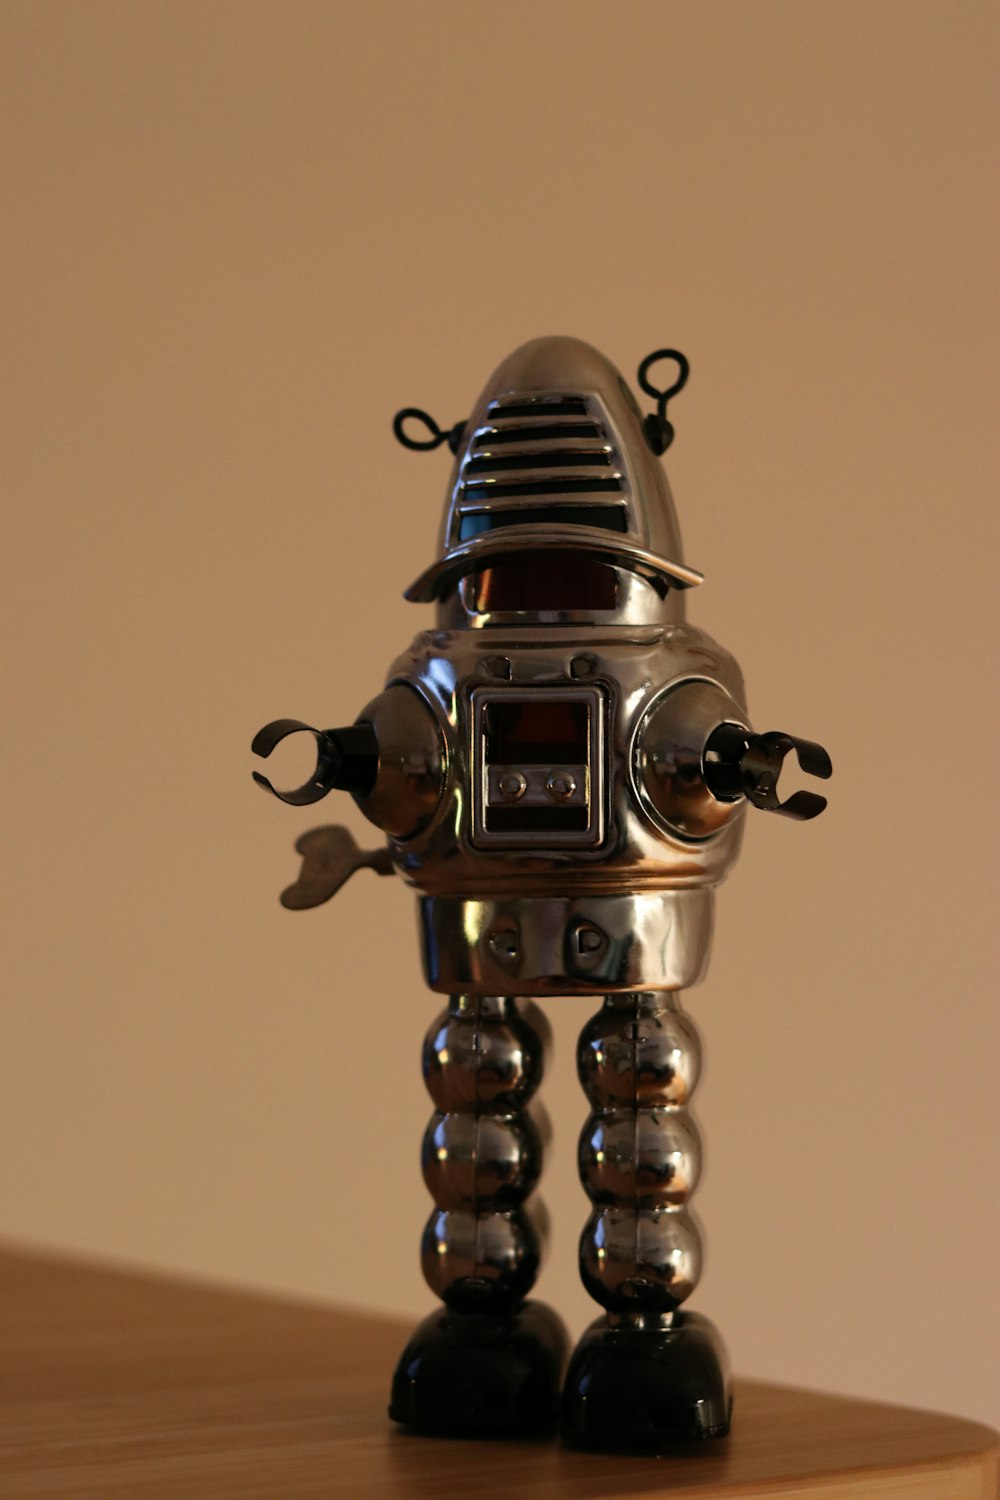 a silver robot toy sitting on top of a wooden table